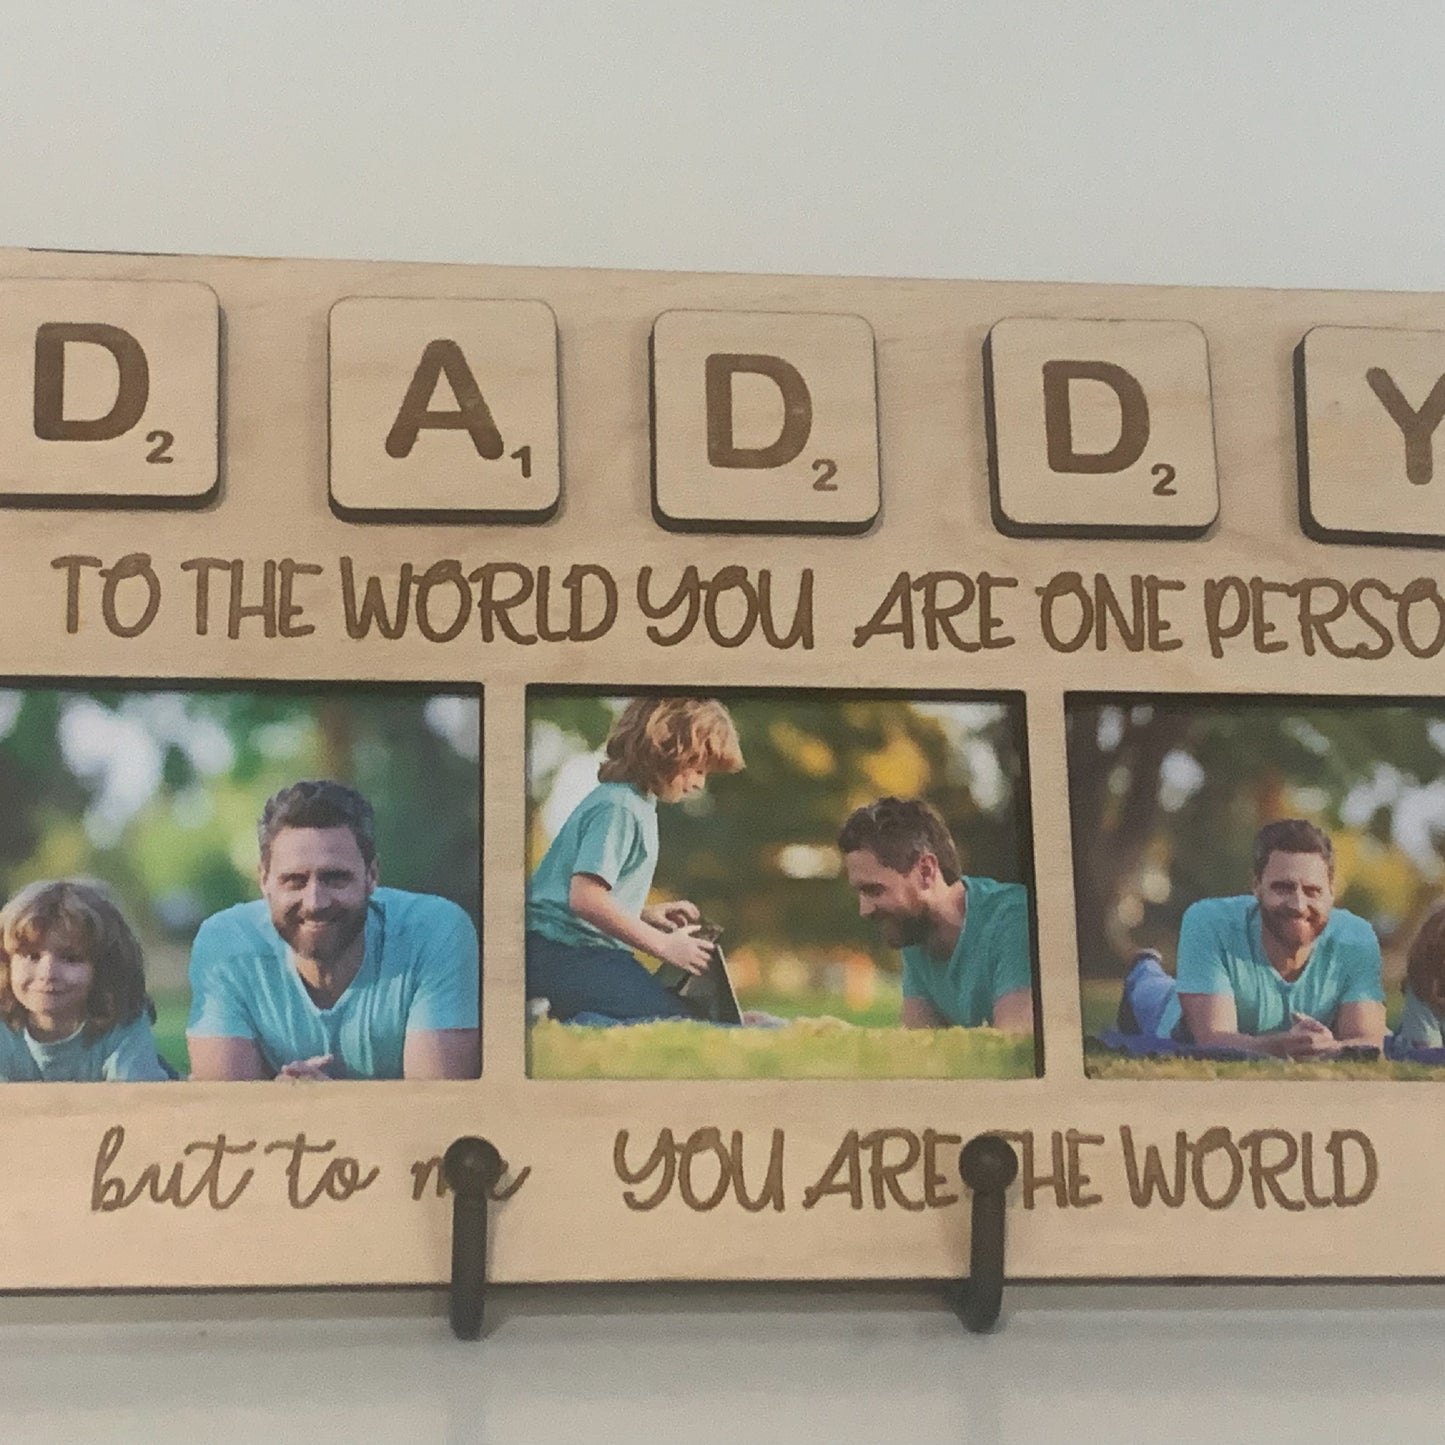 Fathers day gift, husband fathers day gift, father day gift, dad wall art, gift for him, wood sign gift, photo gifts, custom gifts for dad